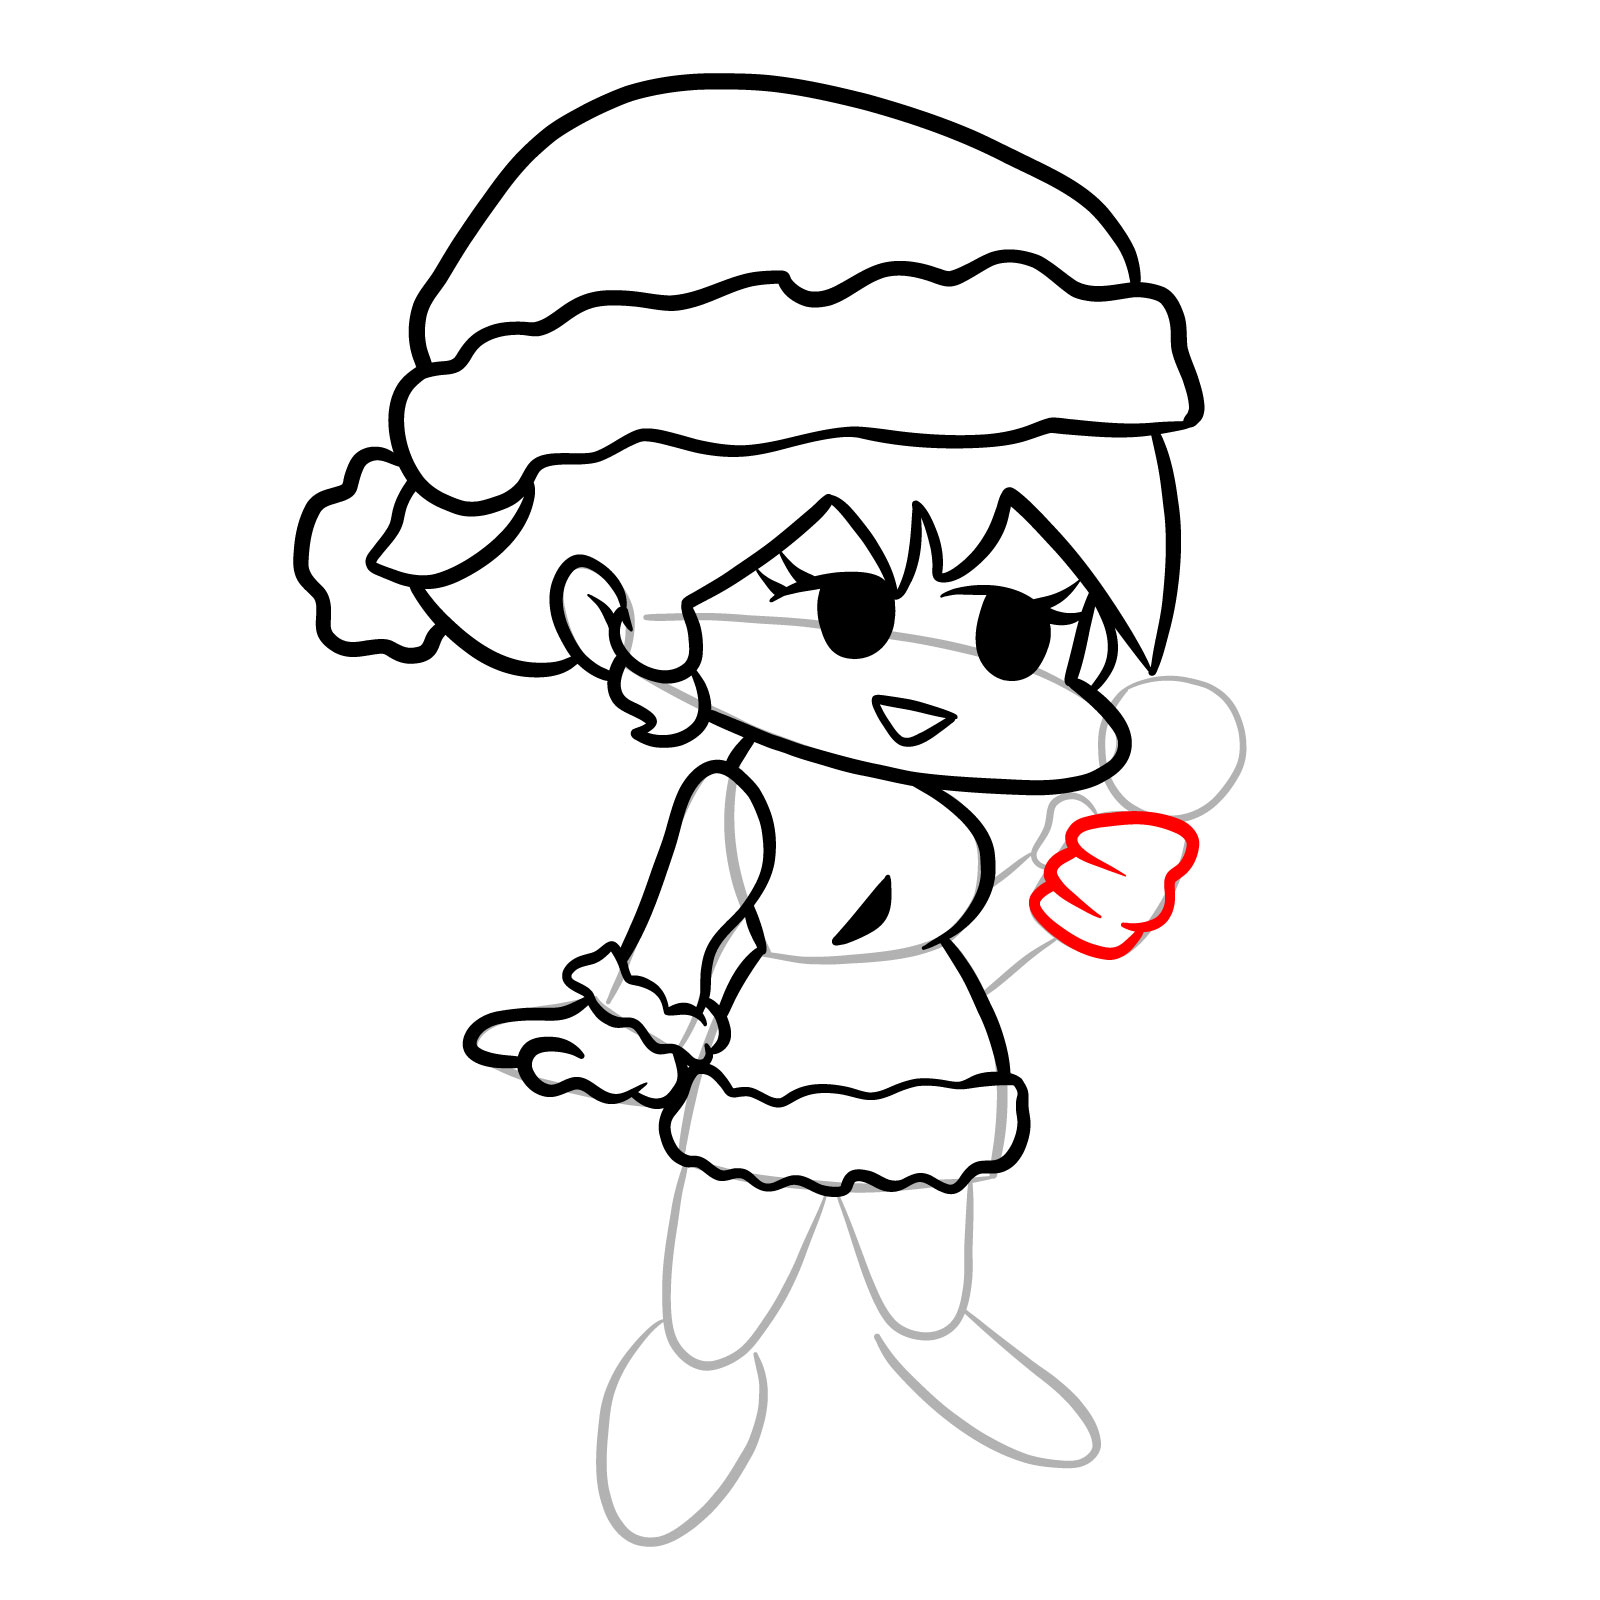 How to draw standing Santa GF - step 18